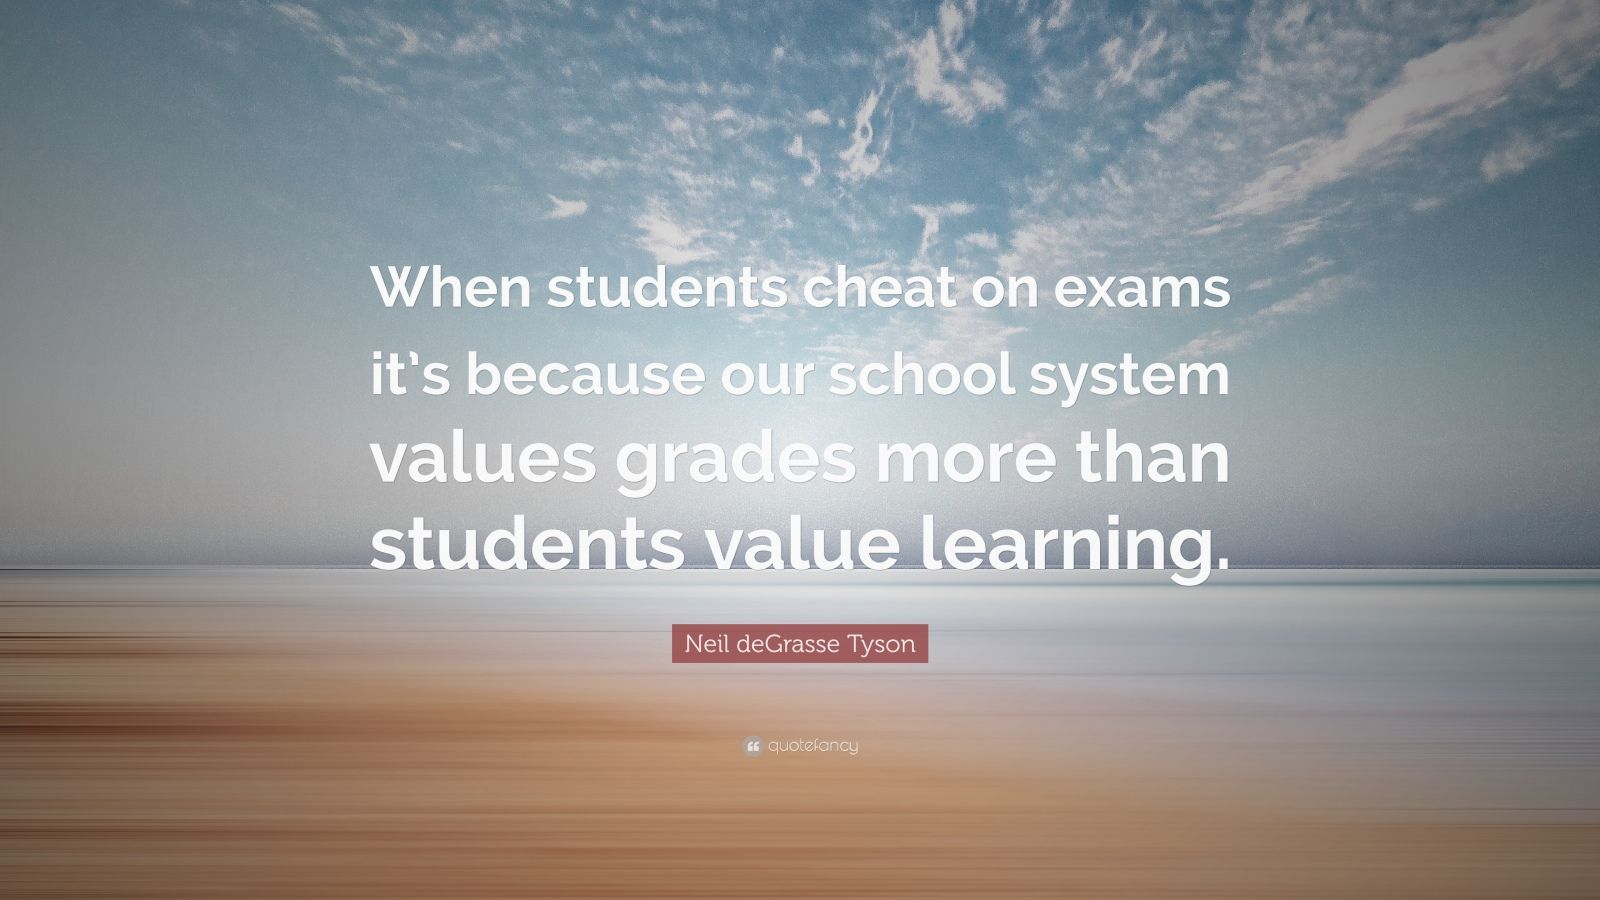 Neil deGrasse Tyson Quote: “When students cheat on exams it’s because